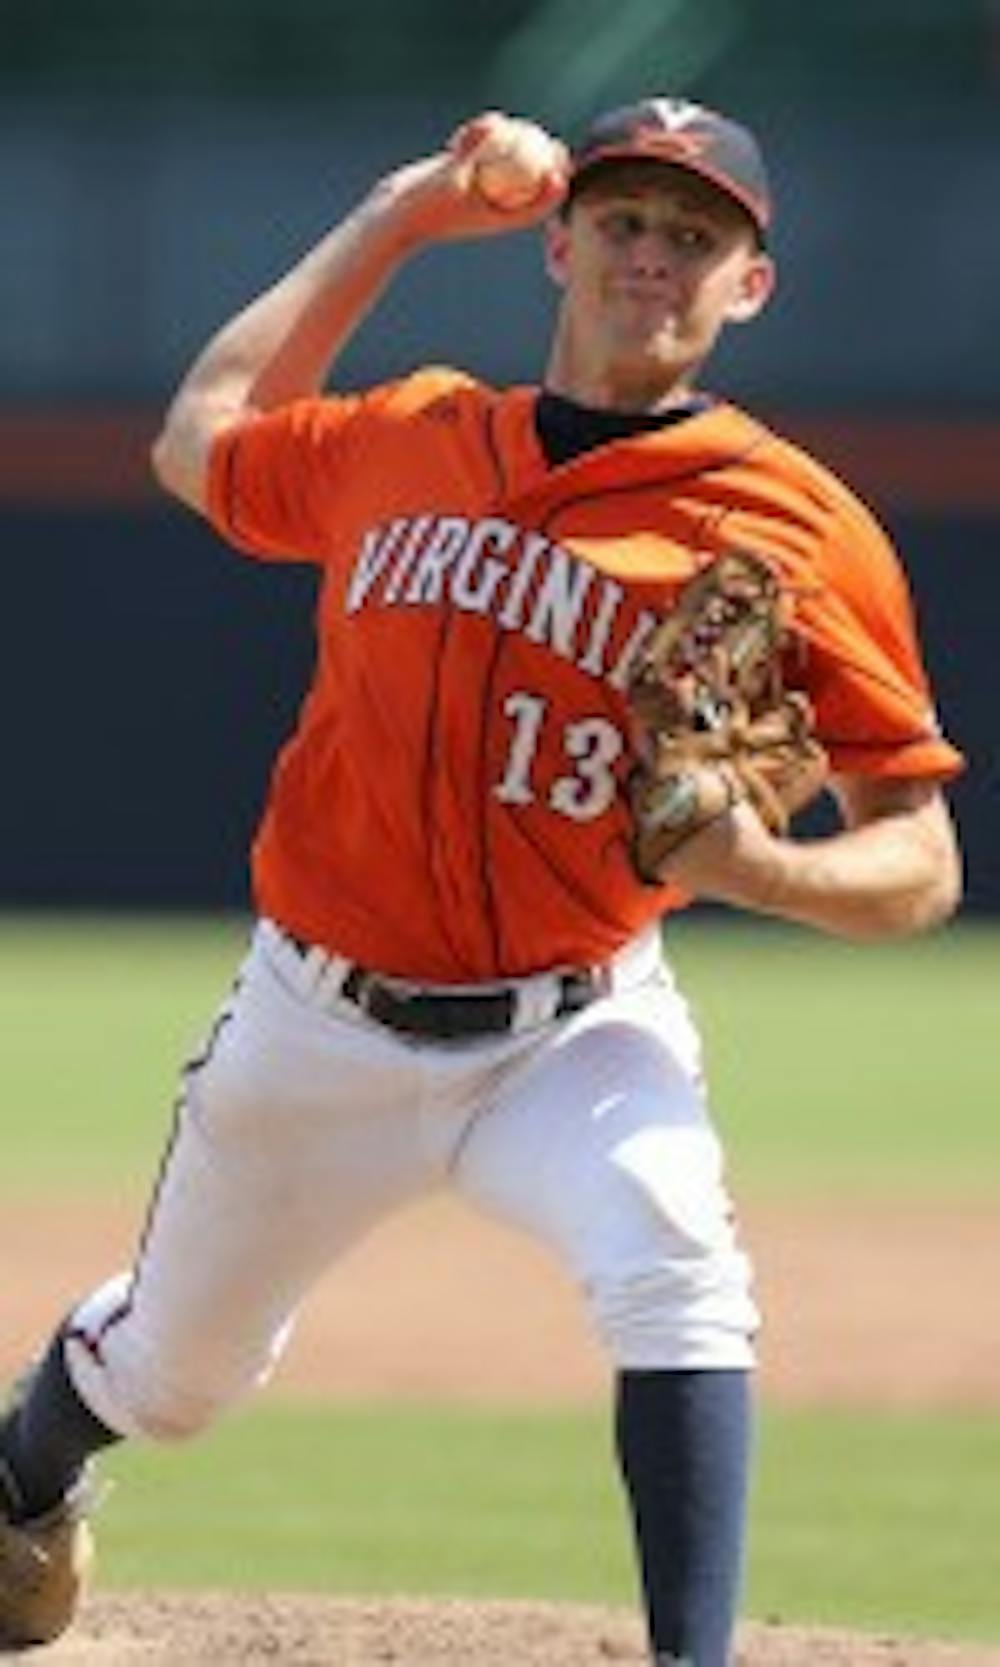 <p>Junior closer Alec Bettinger&nbsp;allowed the go-ahead run in the 9th inning of Wednesday's game against ODU.&nbsp;The former Hylton High School Bulldog is 0-4 with a 5.17 ERA in 2016.&nbsp;</p>